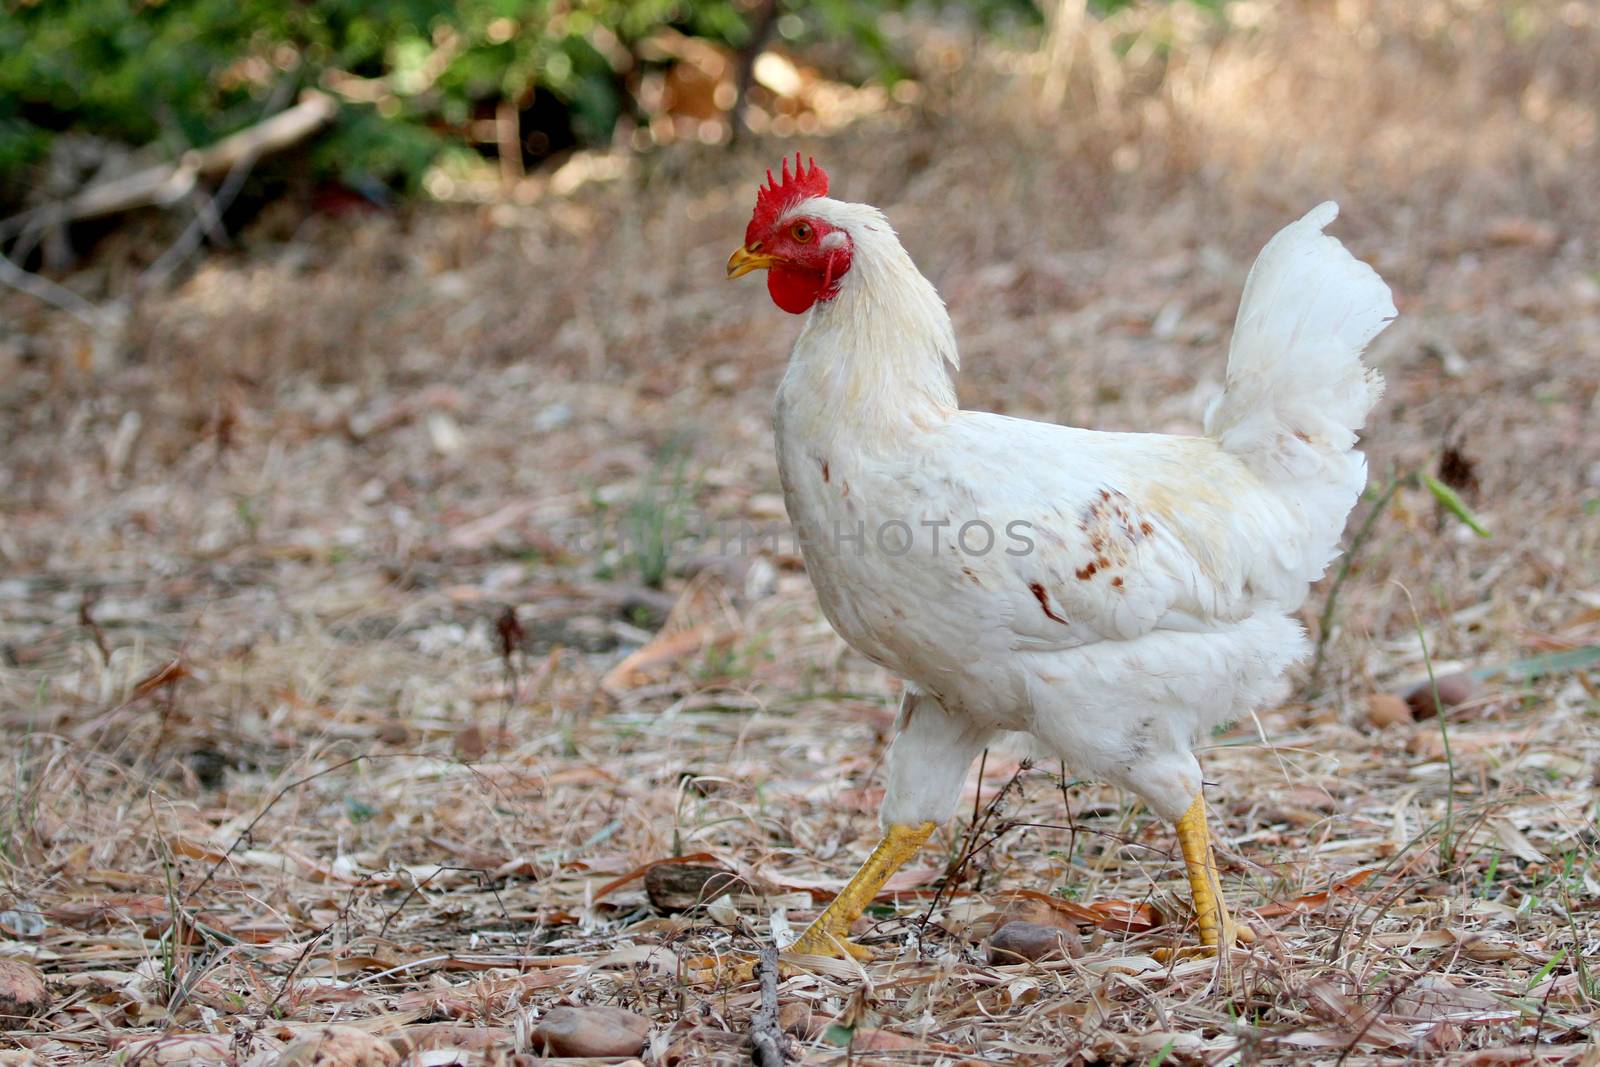 Image of white hen on nature background by yod67